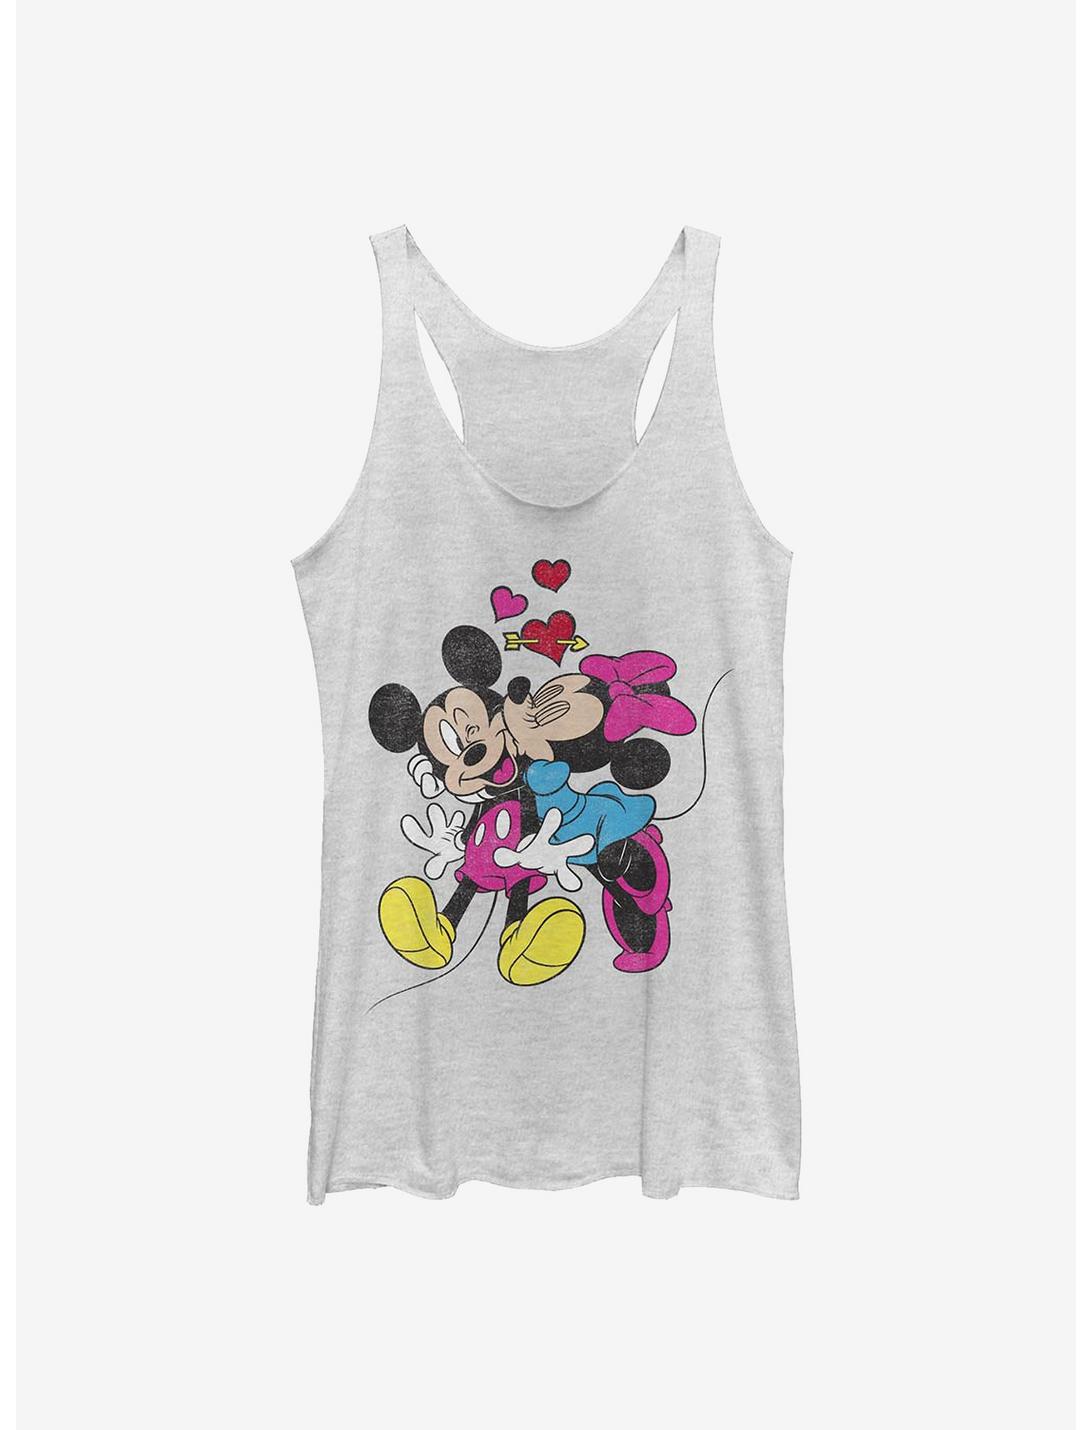 Disney Mickey Mouse & Minnie Mouse Love Girls Tank Top, WHITE HTR, hi-res